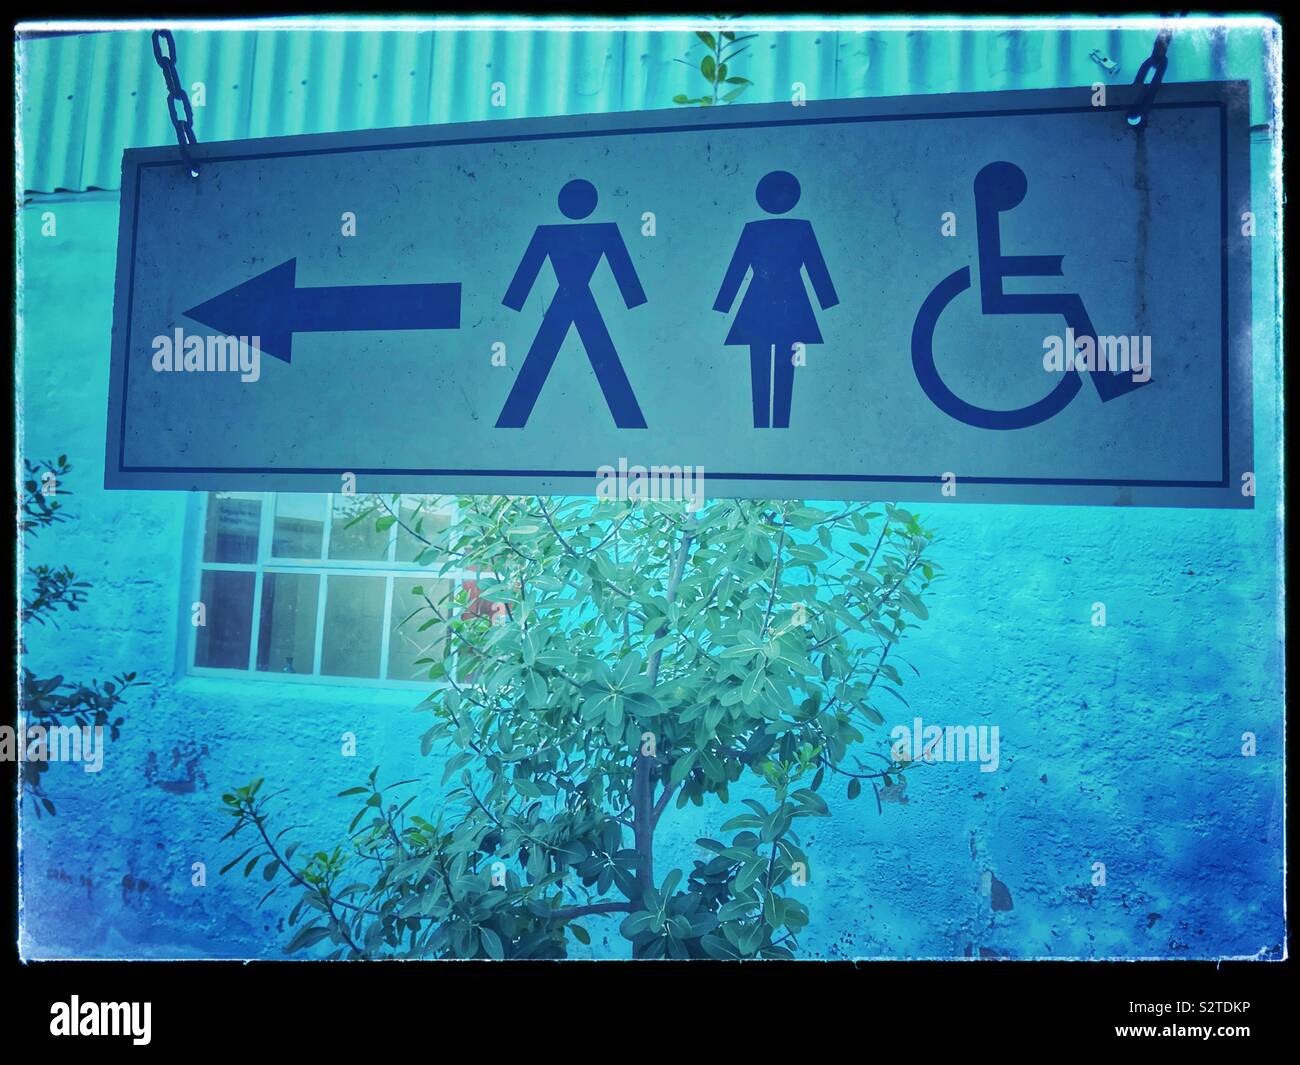 Restrooms sign. Stock Photo